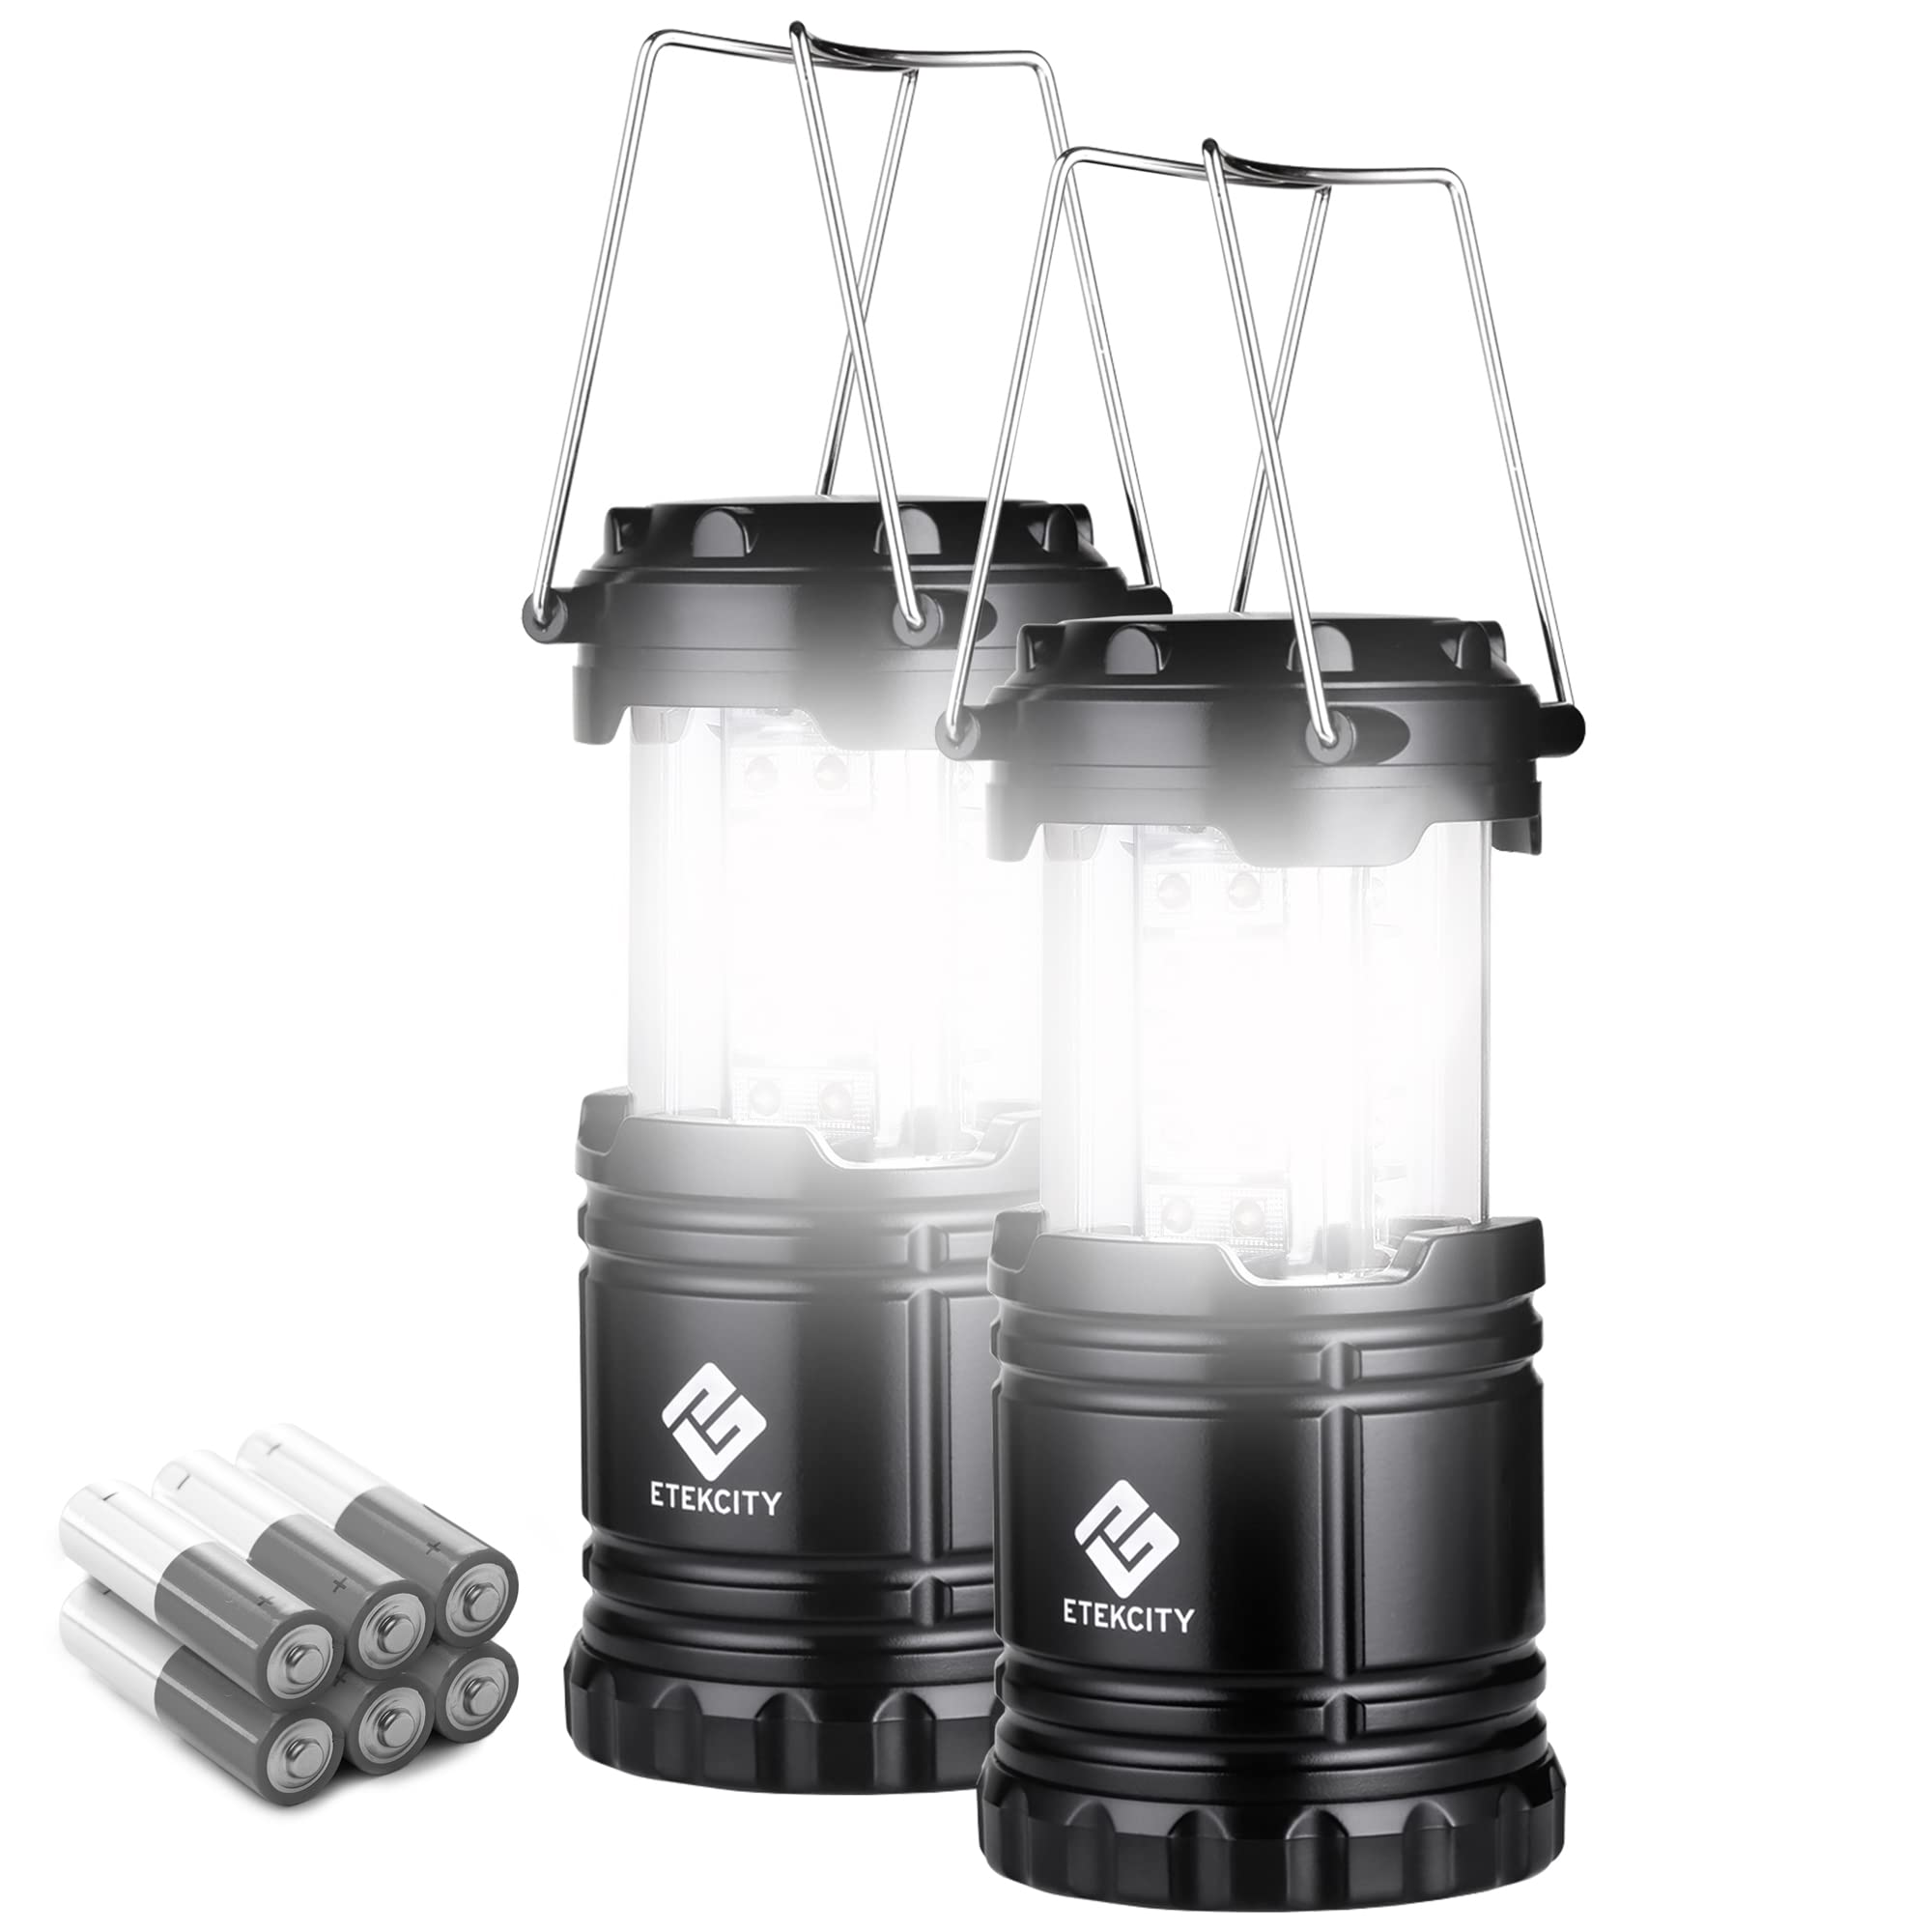 Outdoor Camping Lantern  Battery Operated LED Camping Lantern